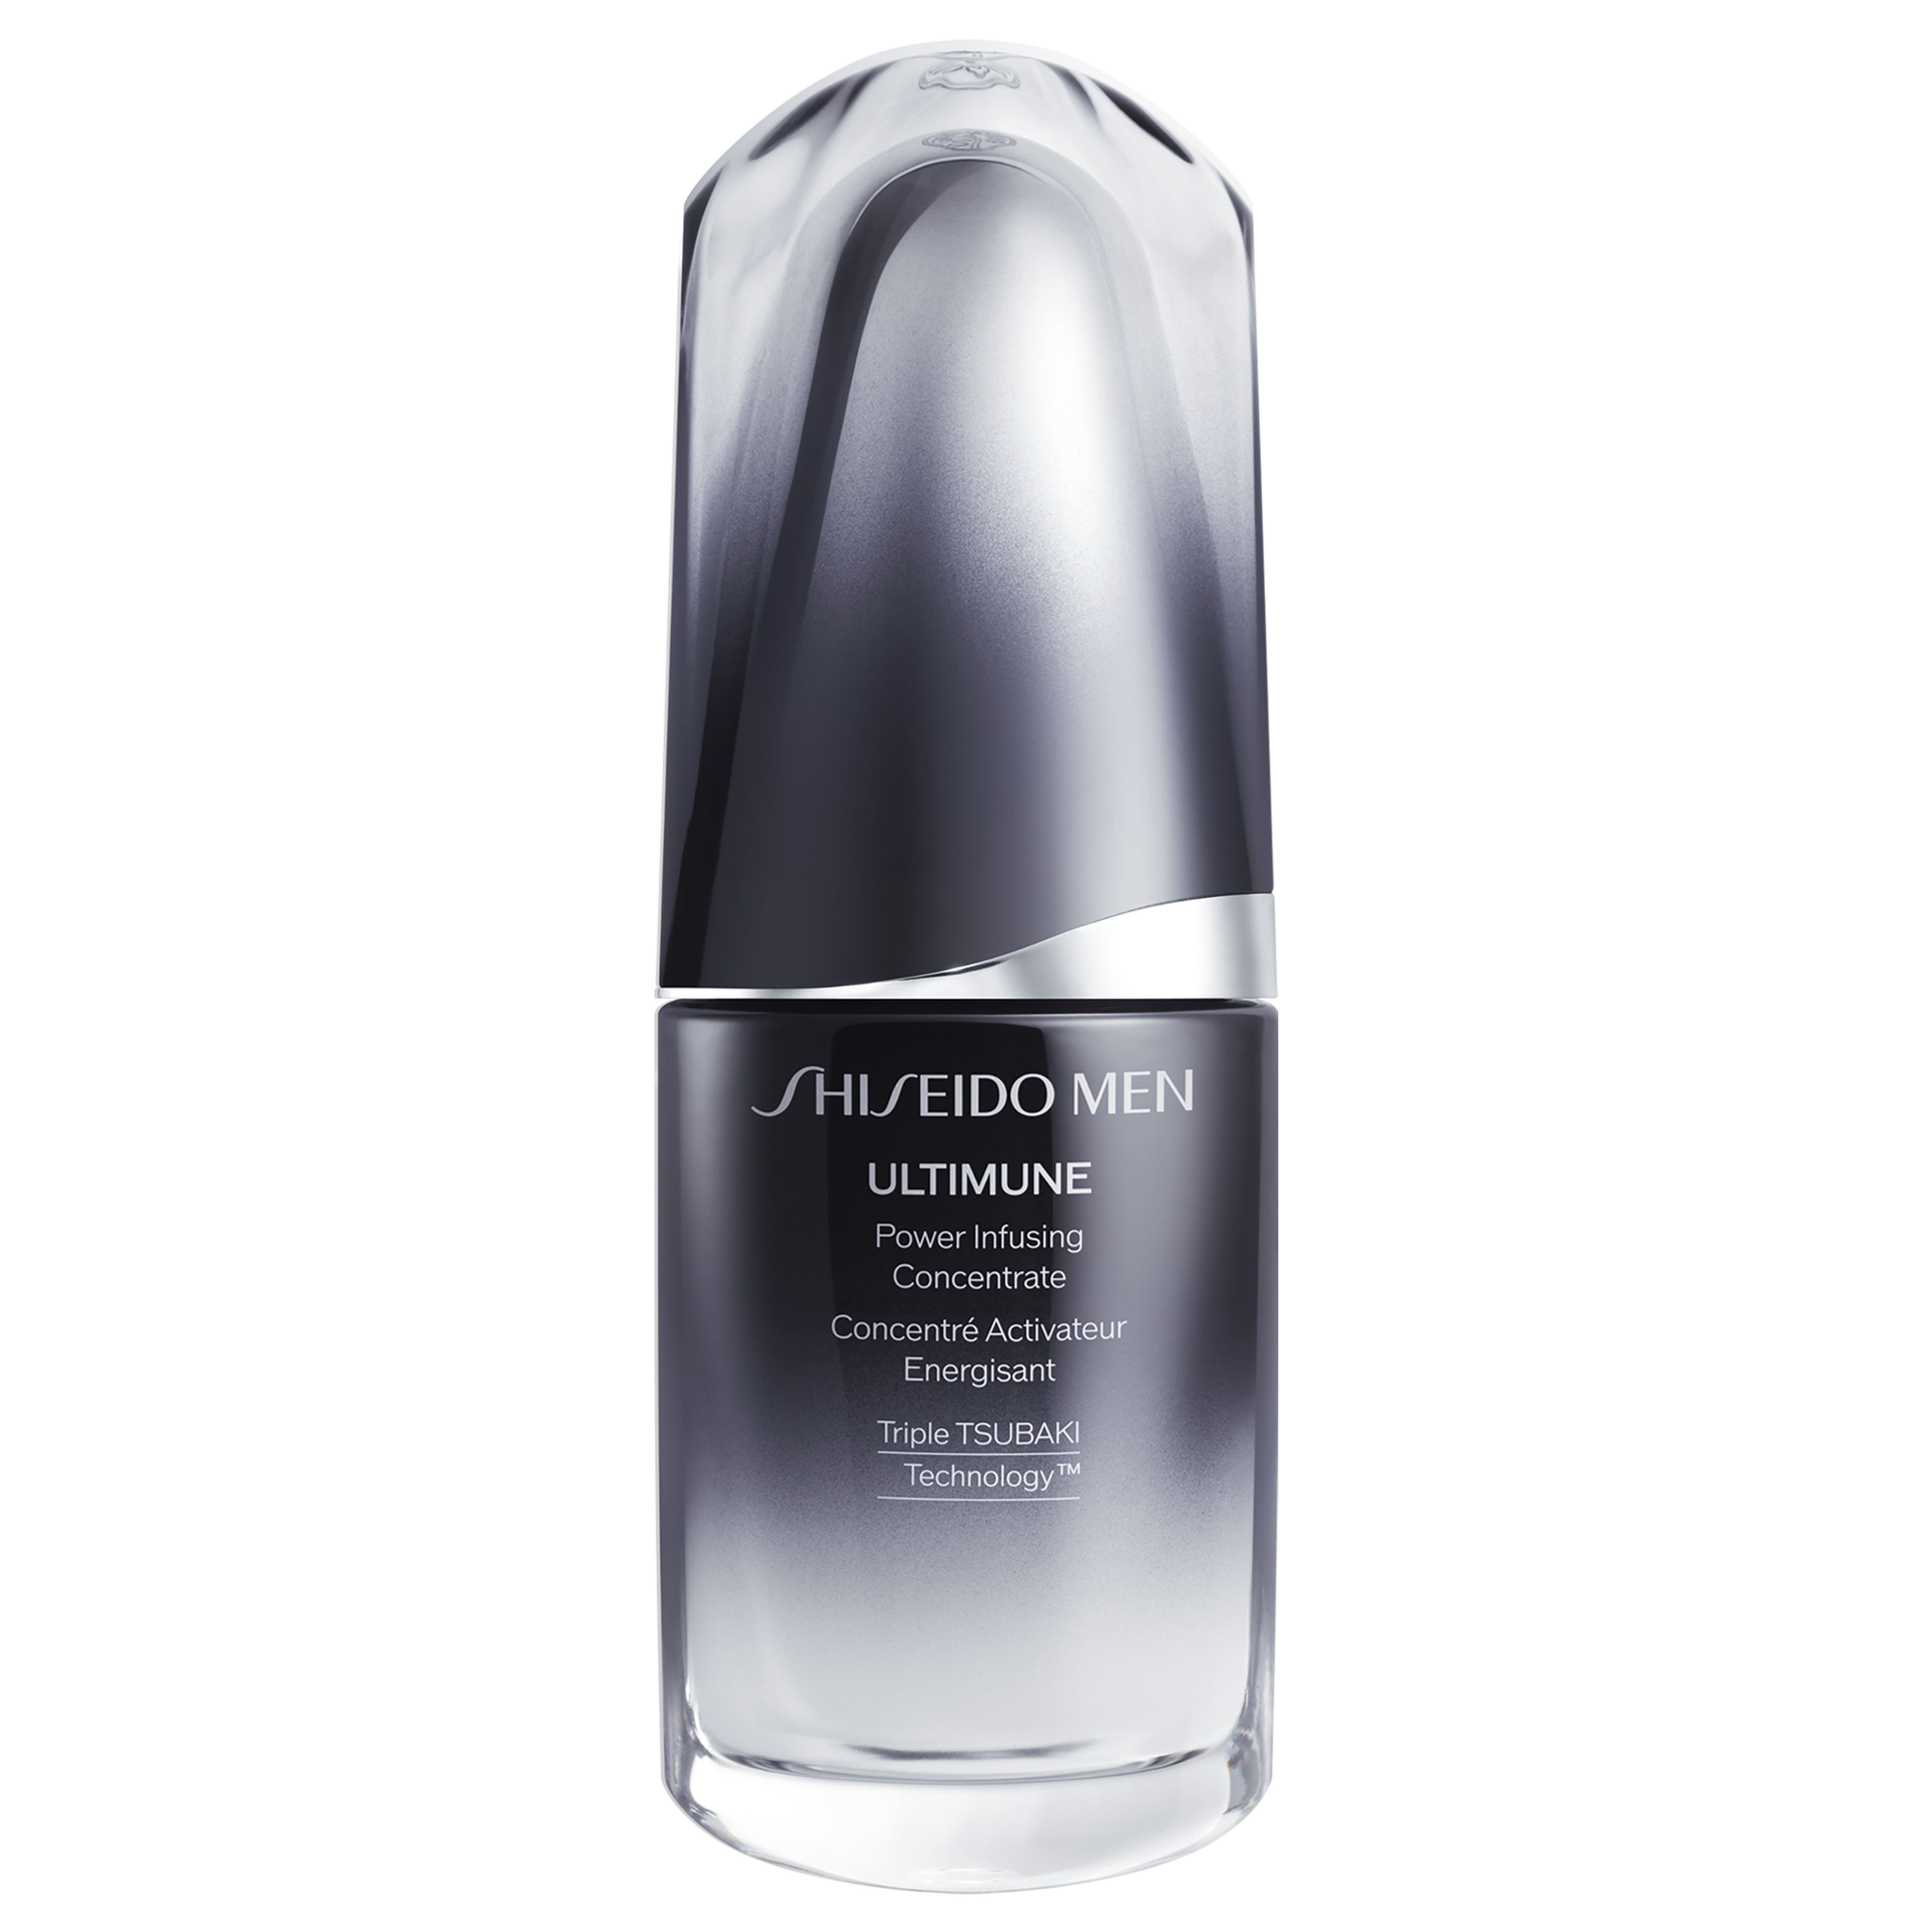 Shiseido Ultimune Power Infusing Concentrate 1